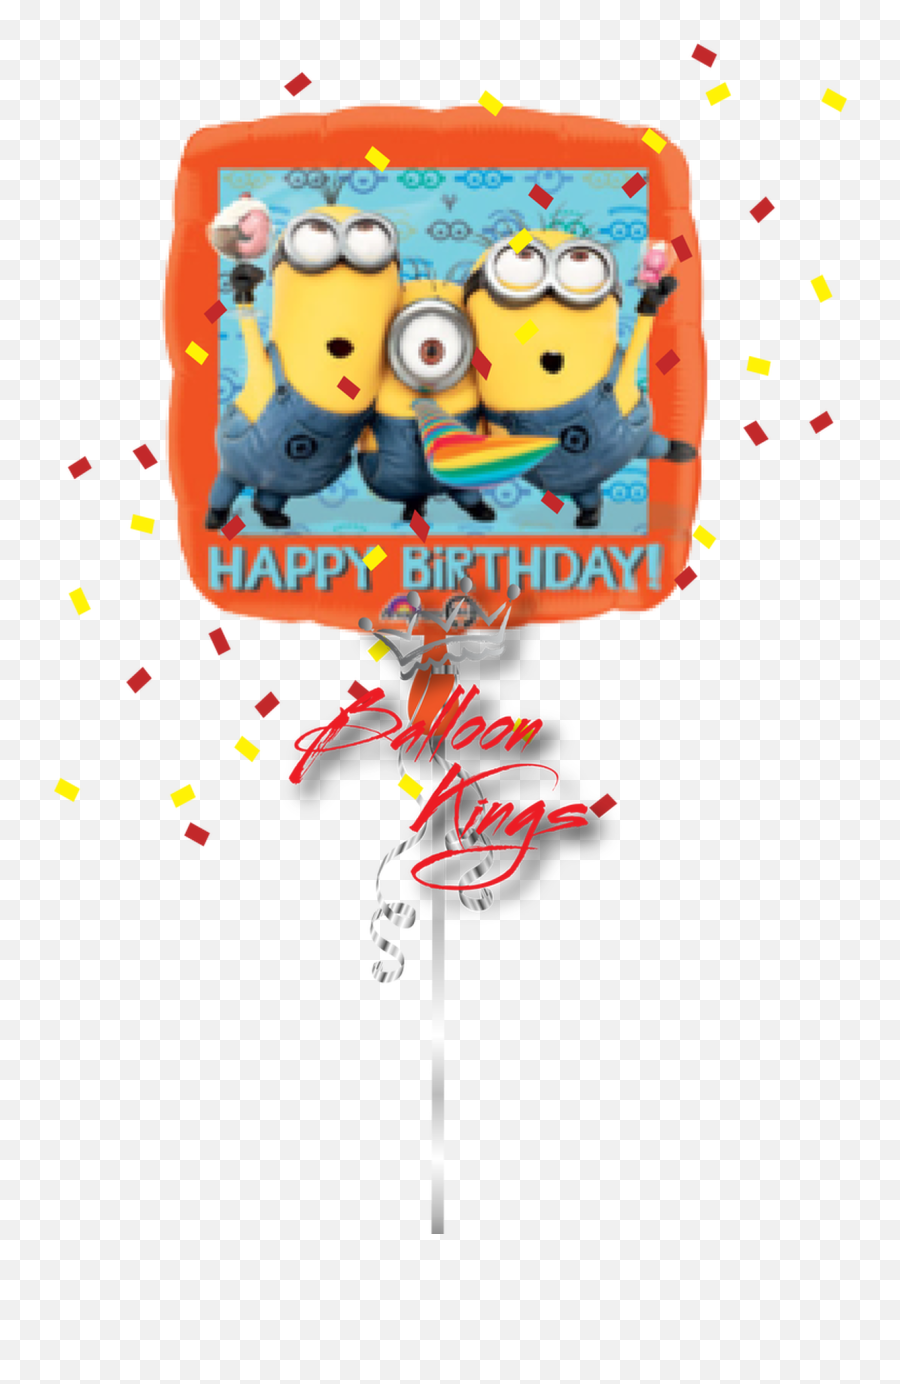 Happy Birthday Minion Images Posted - Happy 10th Birthday Minion Emoji,Happy Birthday Minnion Emoticon